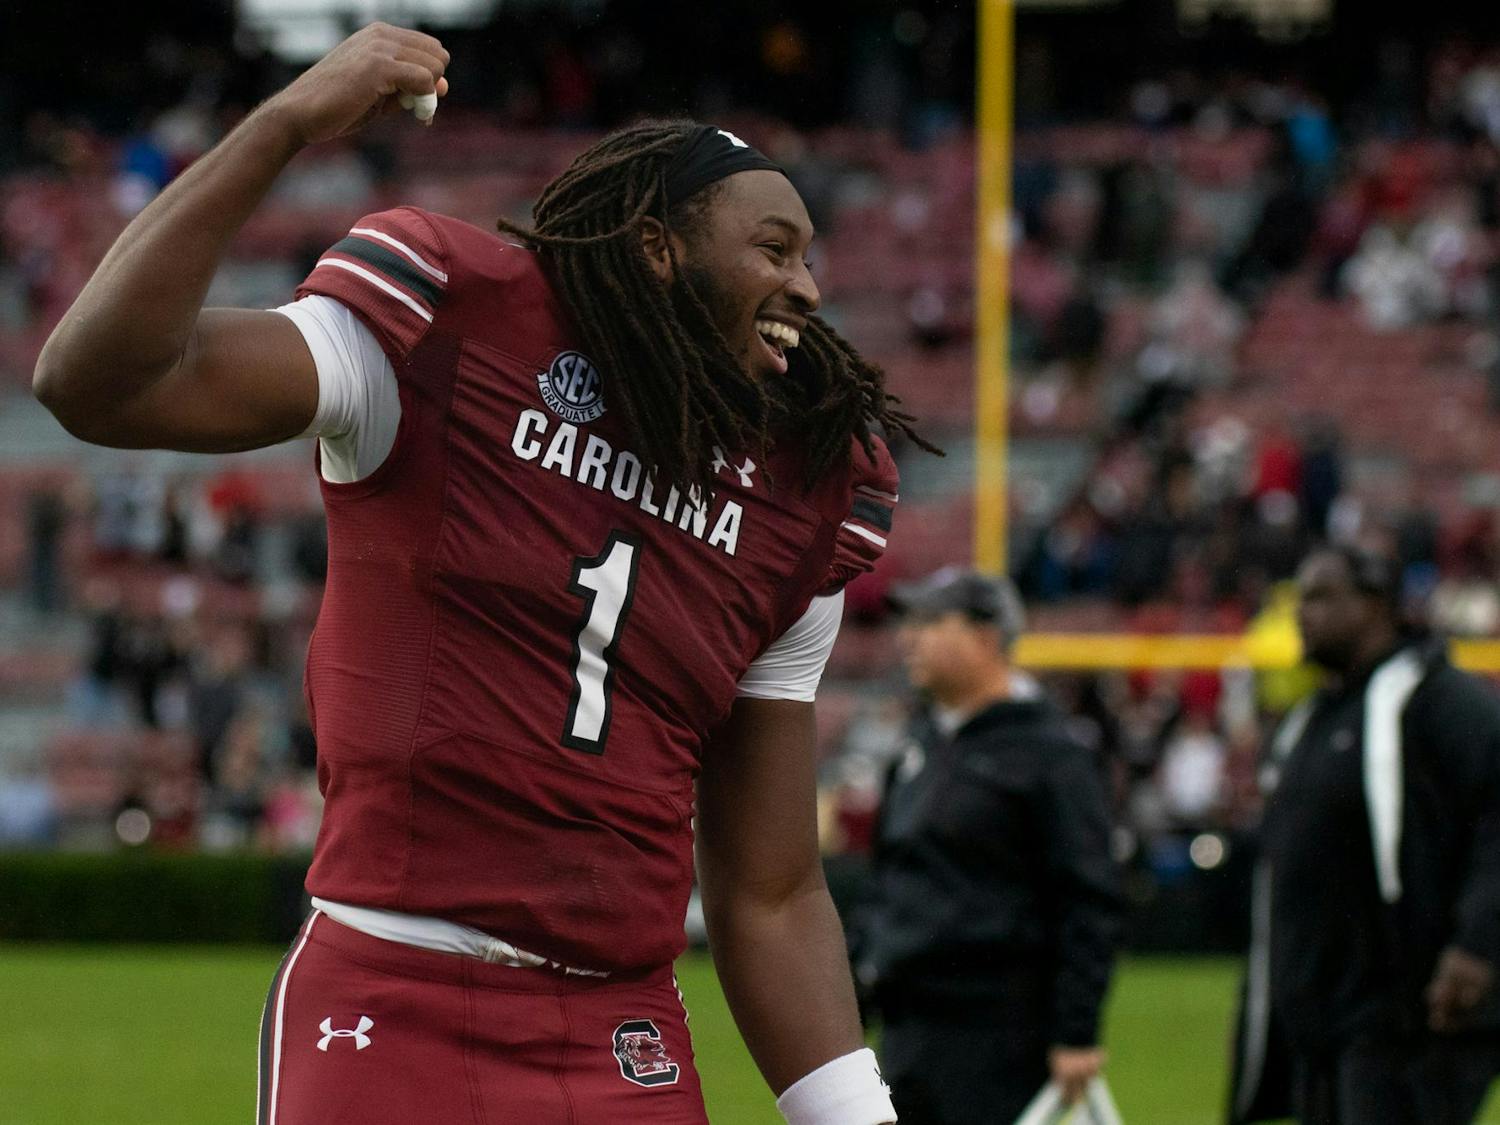 Graduate student tight end Trey Knox celebrates on the field after South Carolina scored a touchdown against Vanderbilt. The Gamecocks scored seven touchdowns, covering 487 yards during its 47-6 victory.